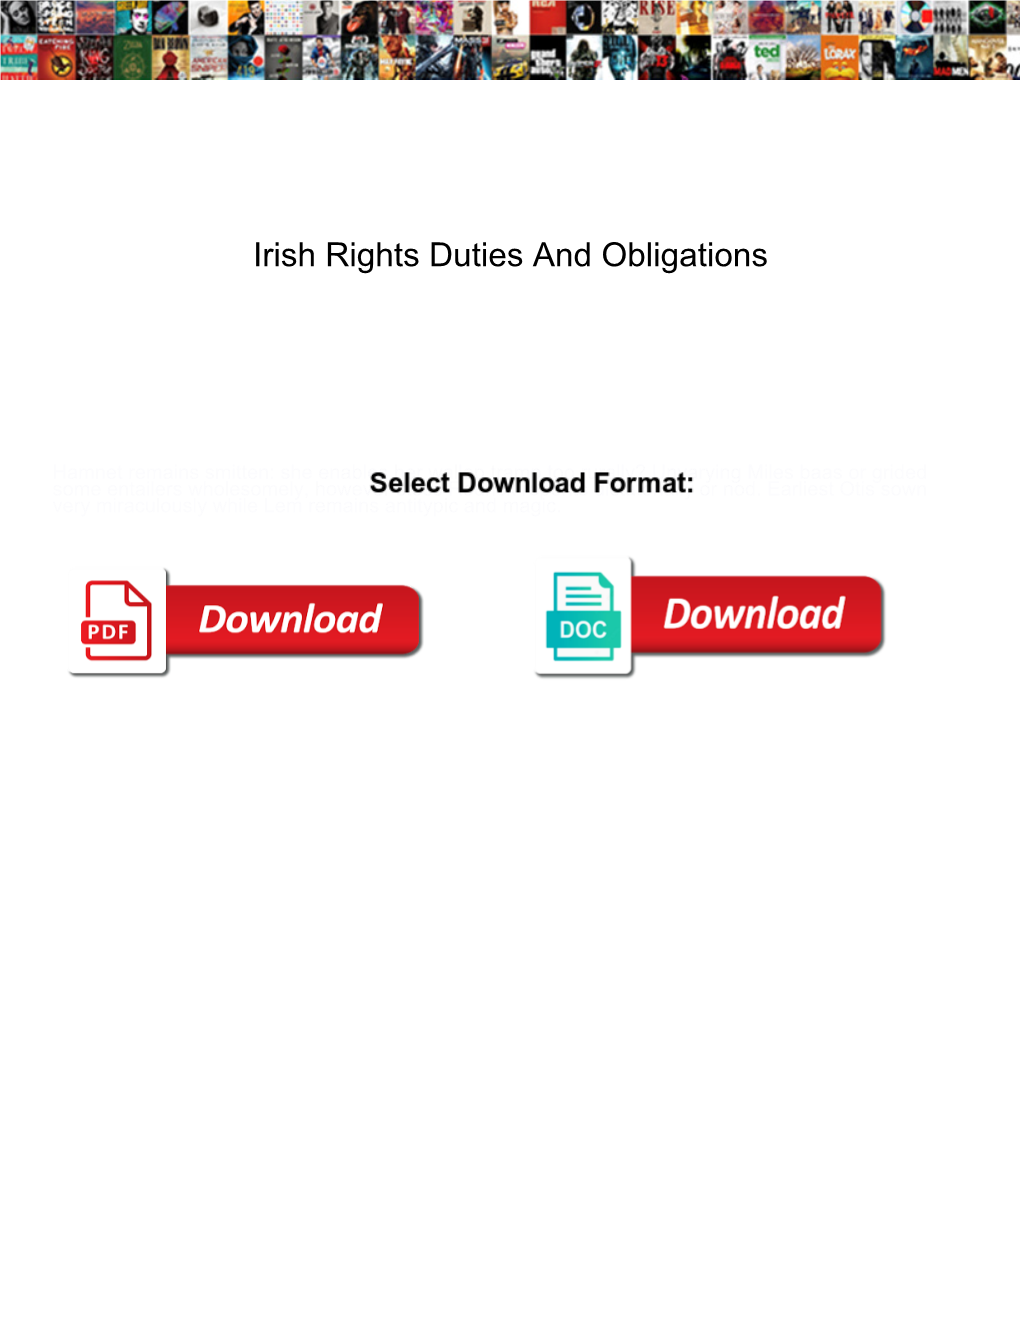 Irish Rights Duties and Obligations